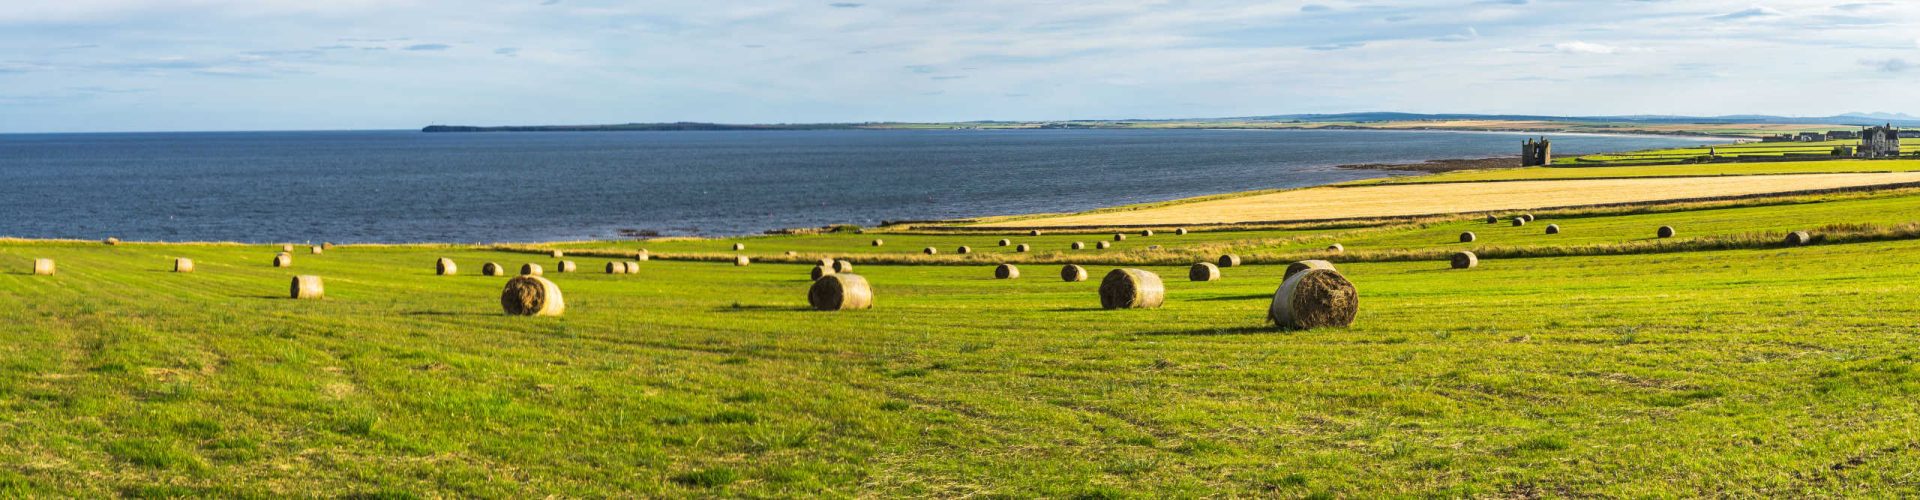 Sunny field with hay bales on the north coast of Scotland